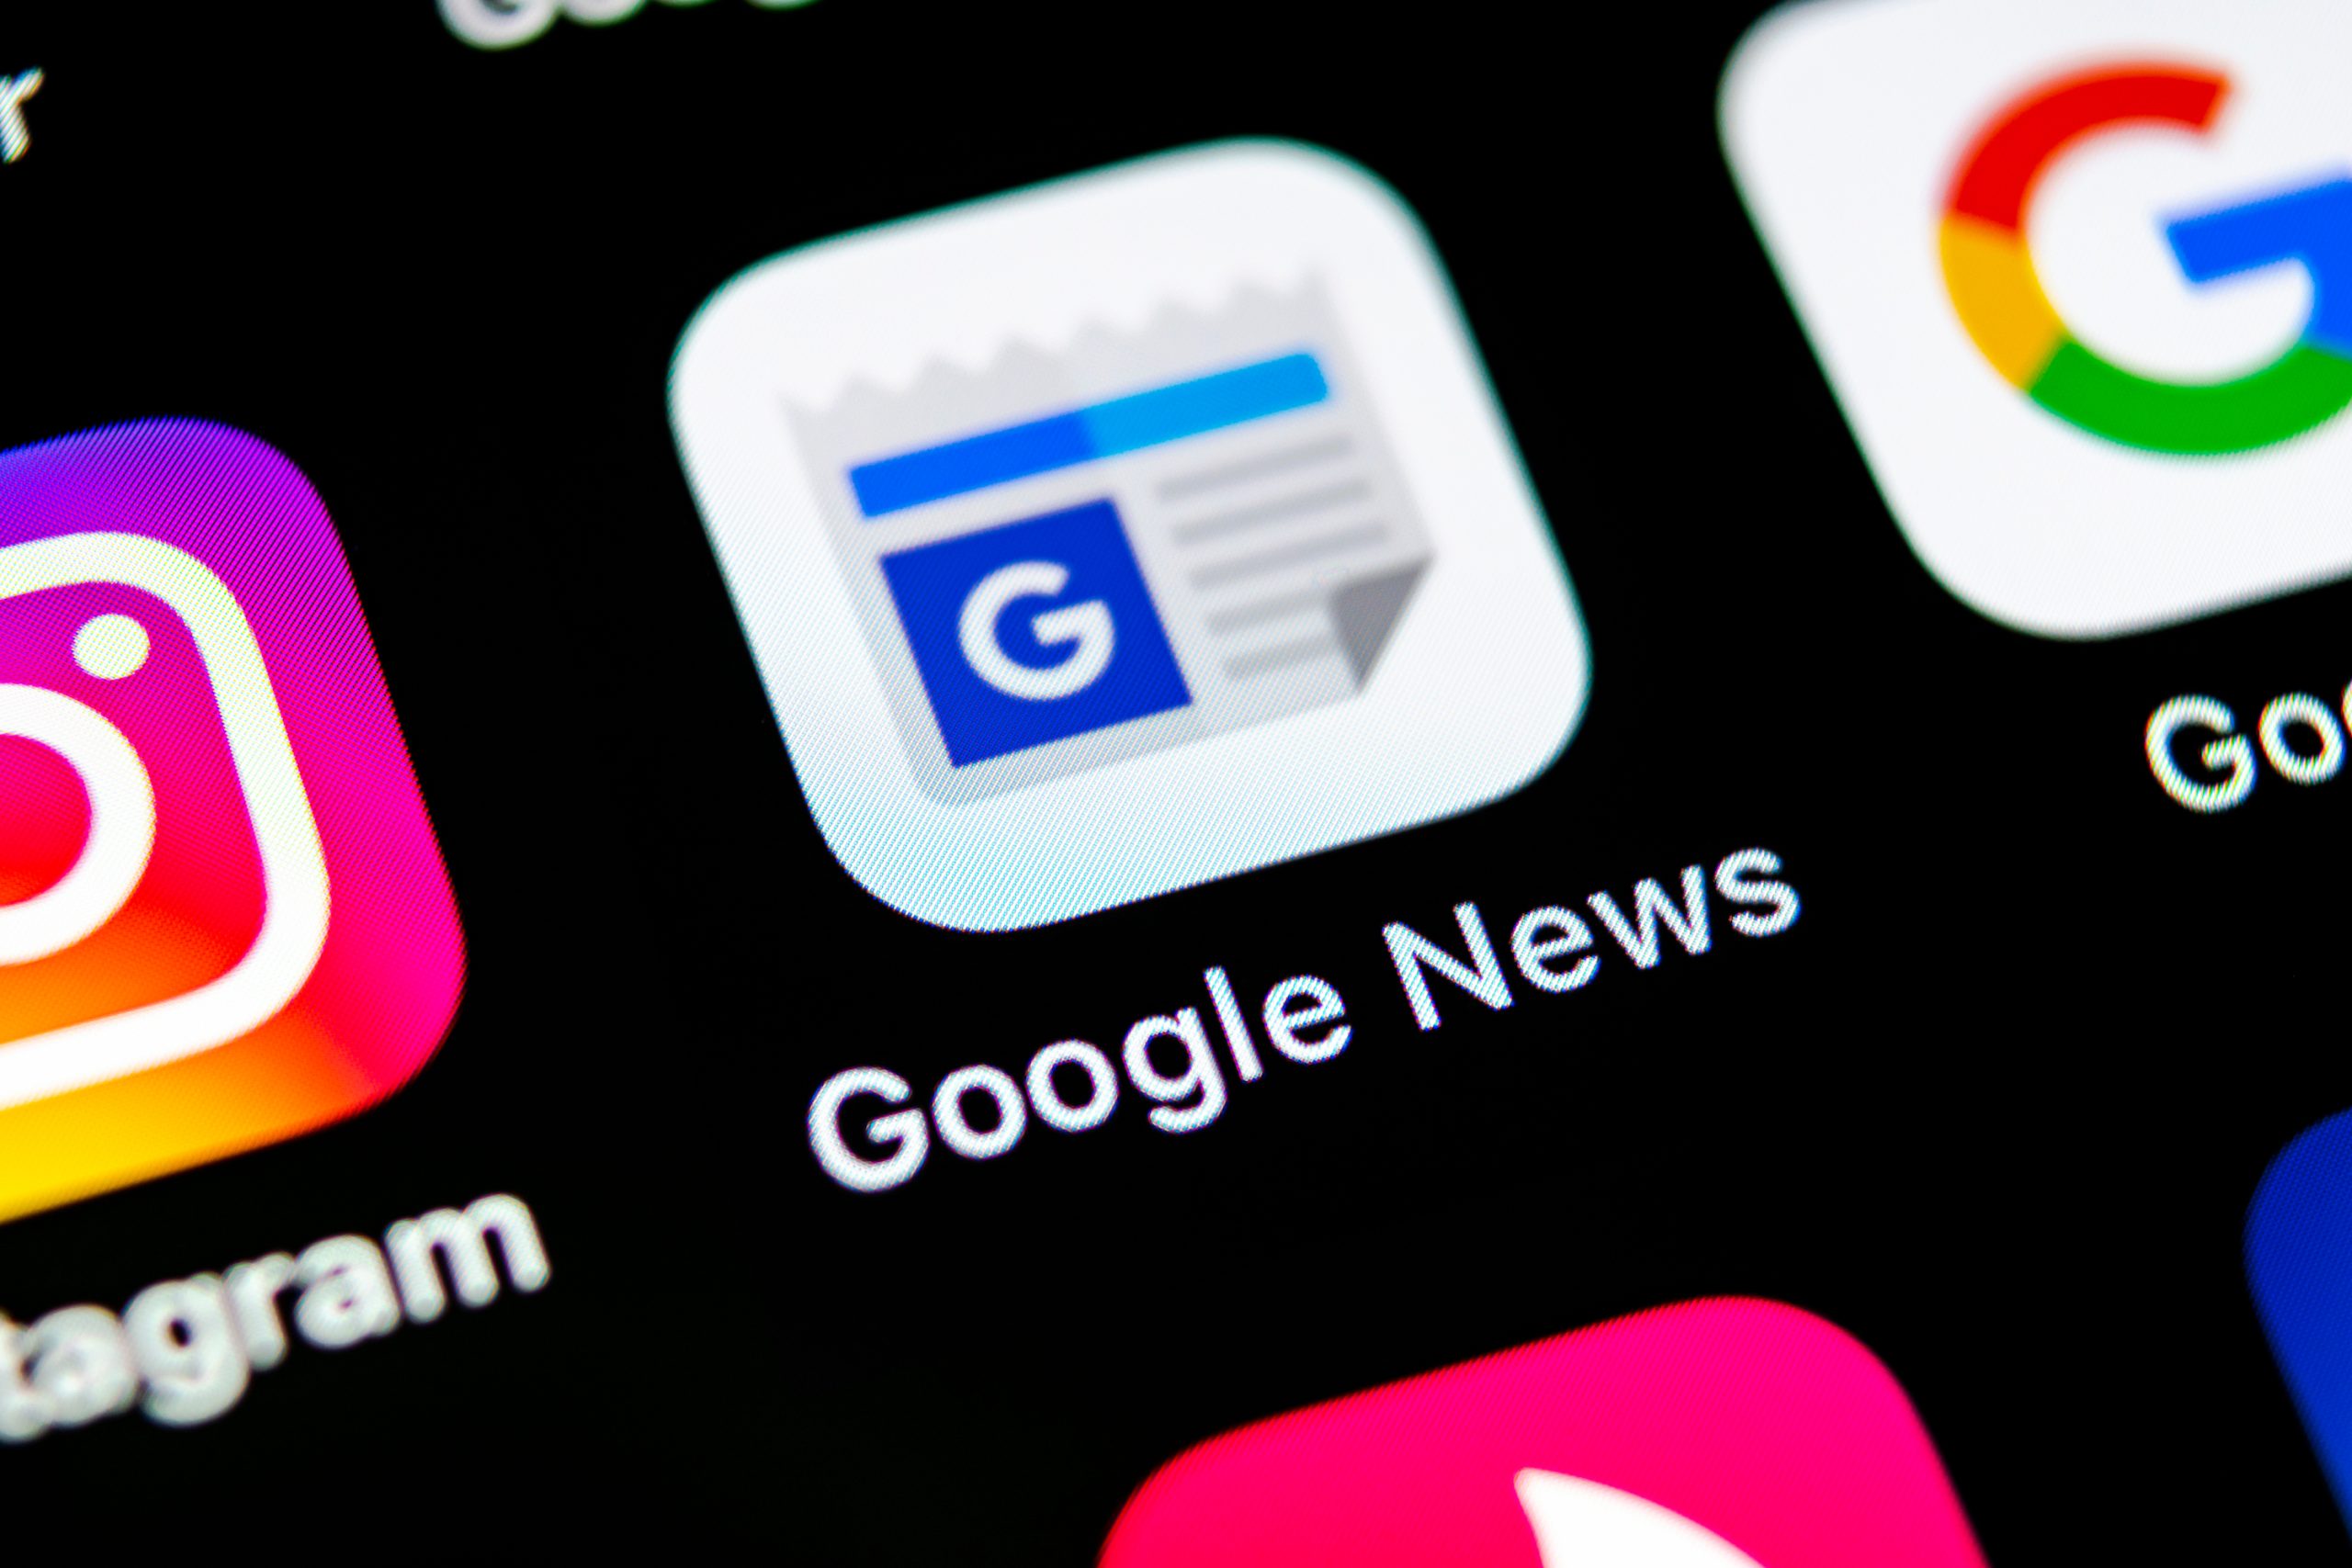 Google News Indexing Disruption Causes Decrease In Traffic For Content Publishers